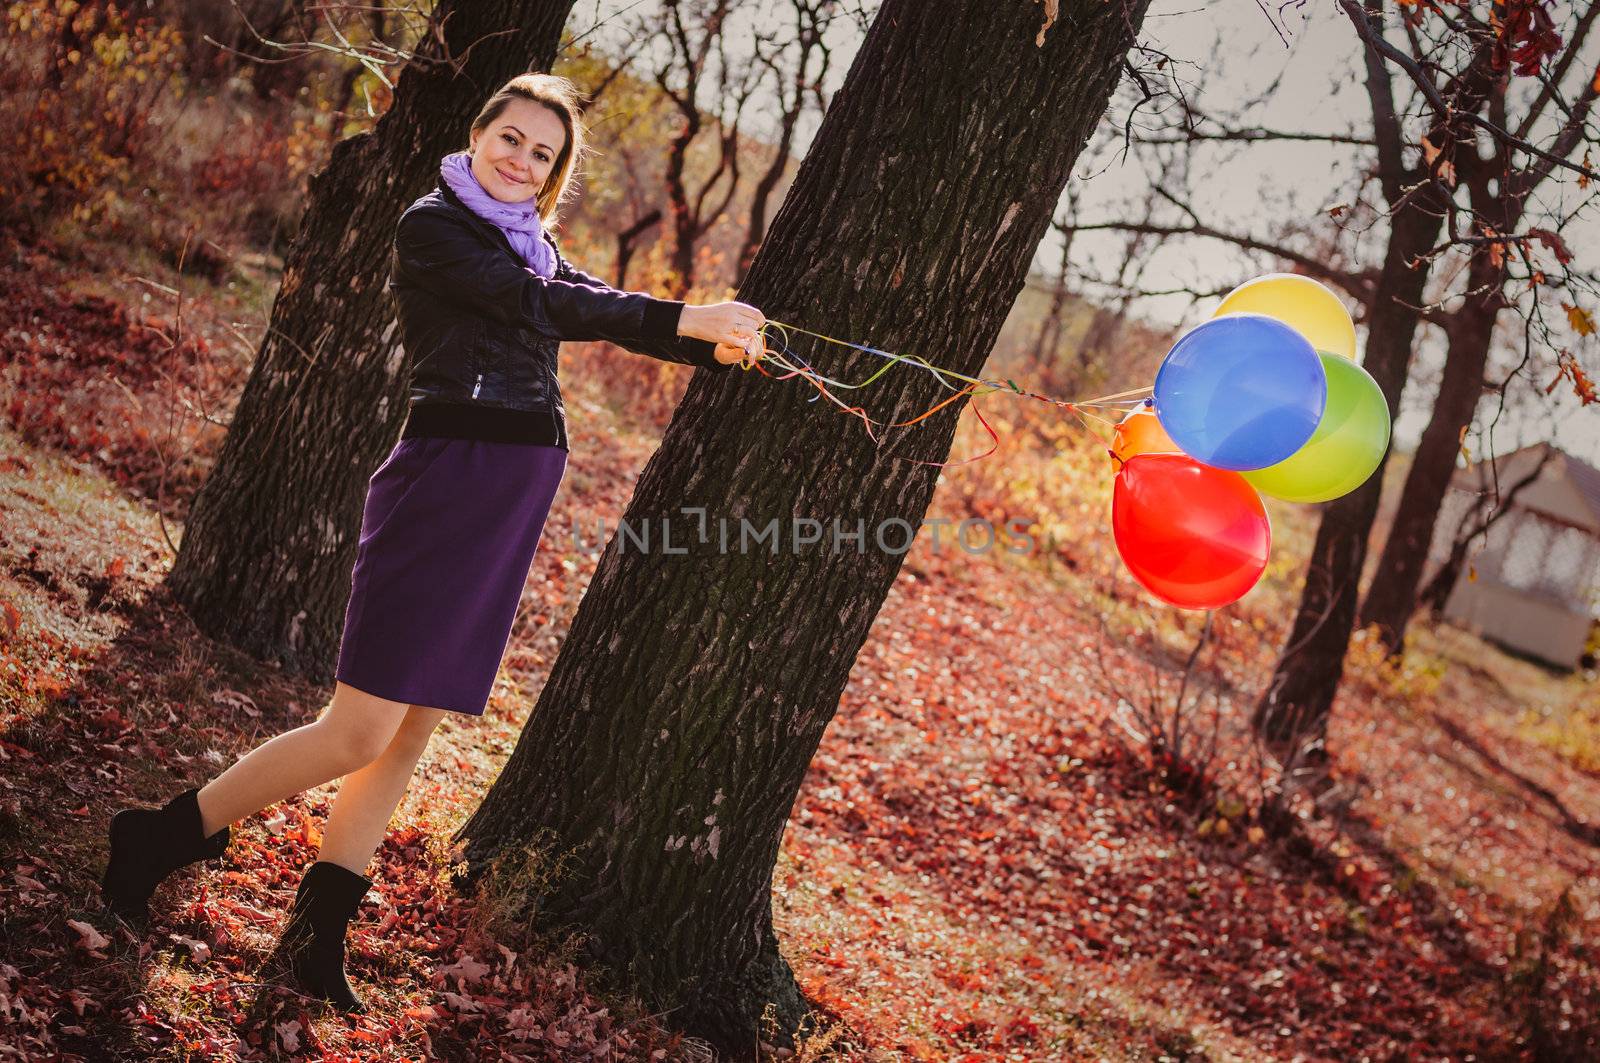 Young pregnant woman with colorful balloons in autumn forest